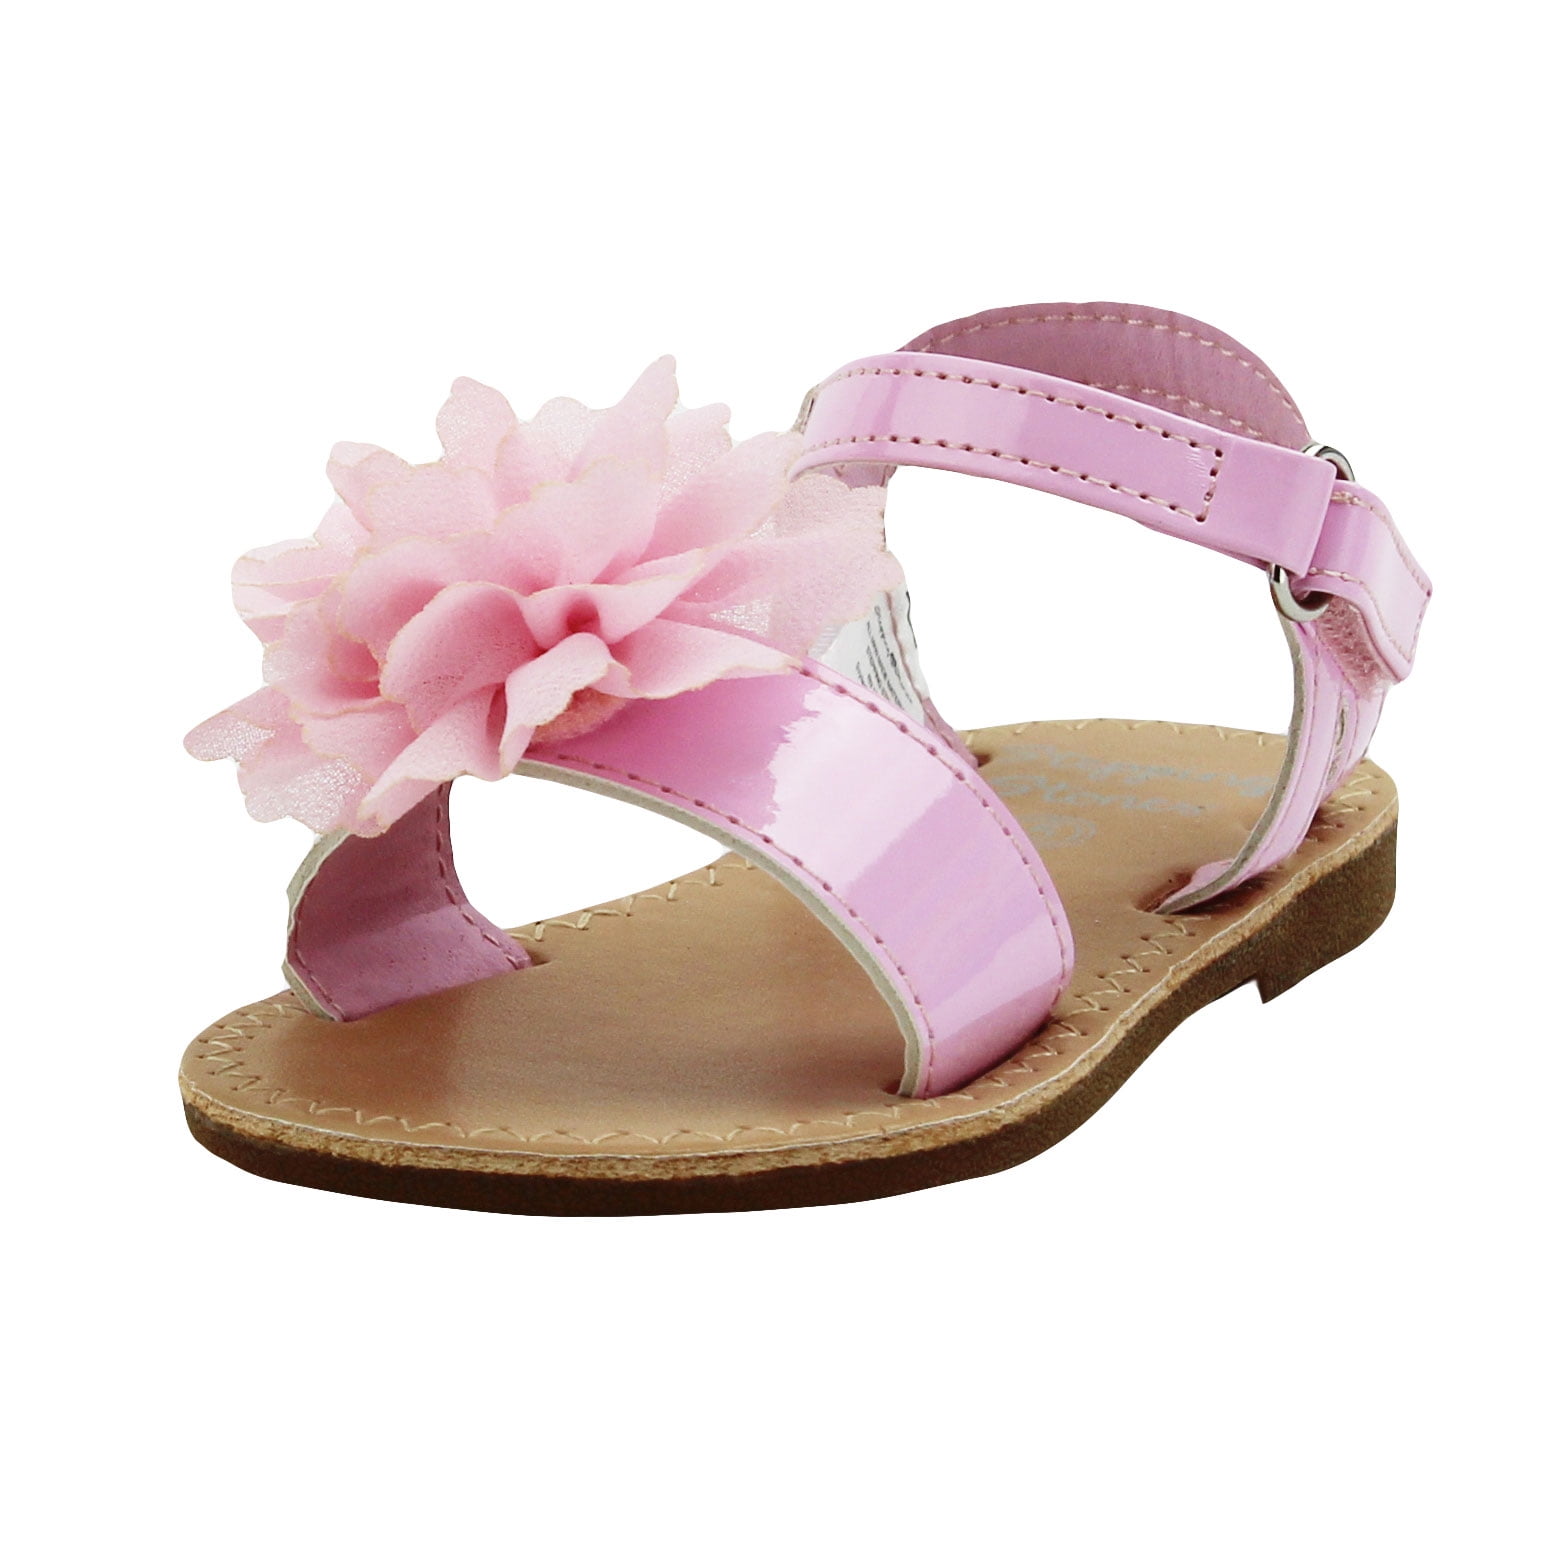 pink sandals size 7